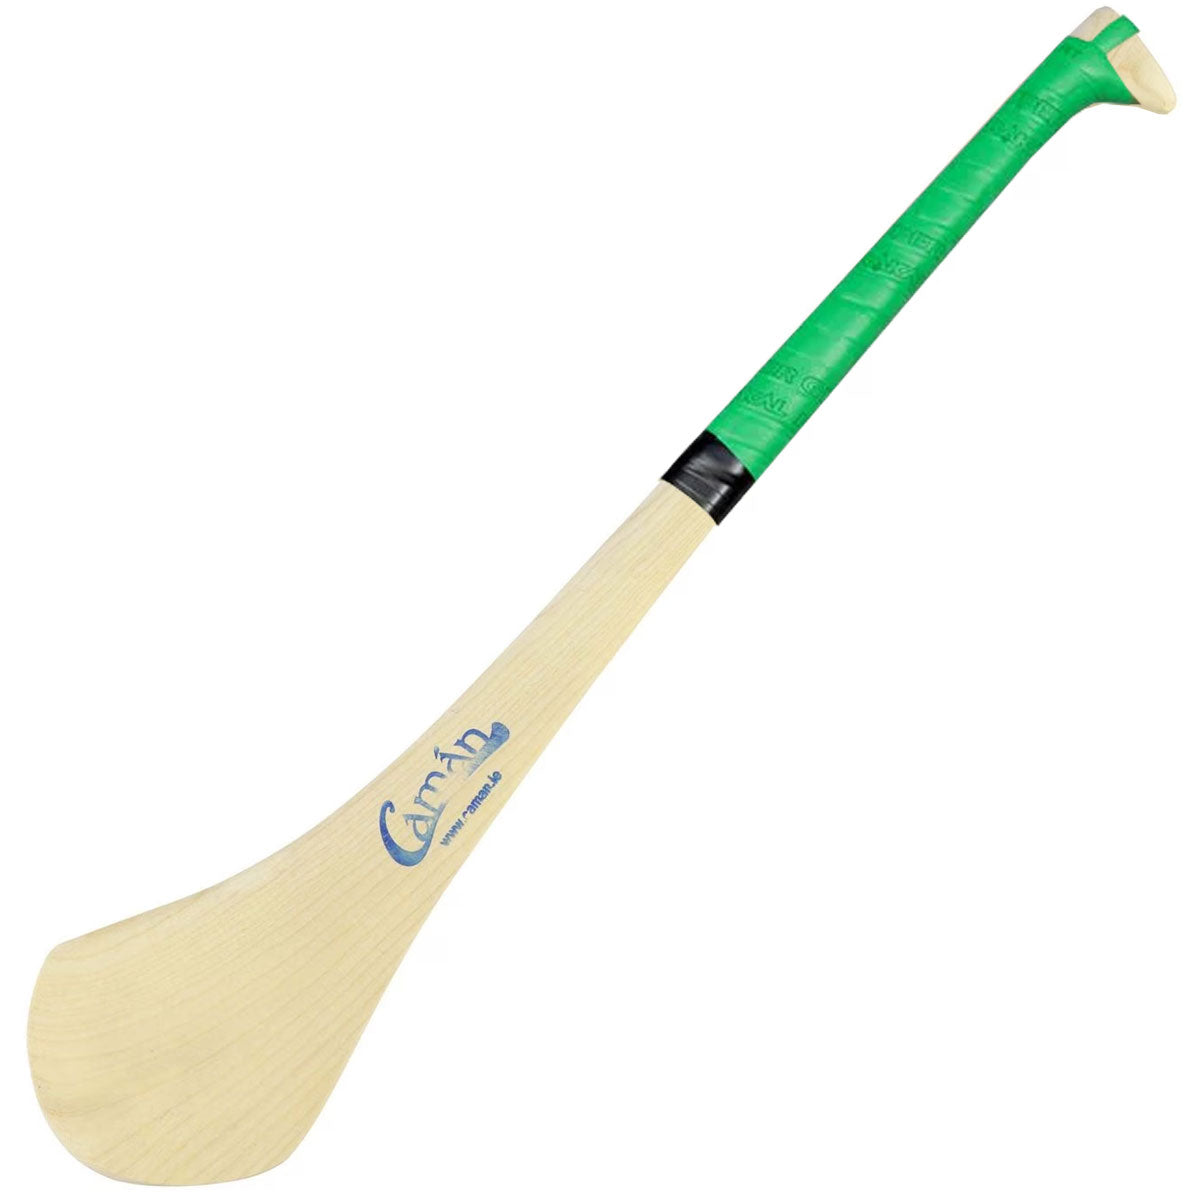 Caman Hurling Stick size 33 (Inches)